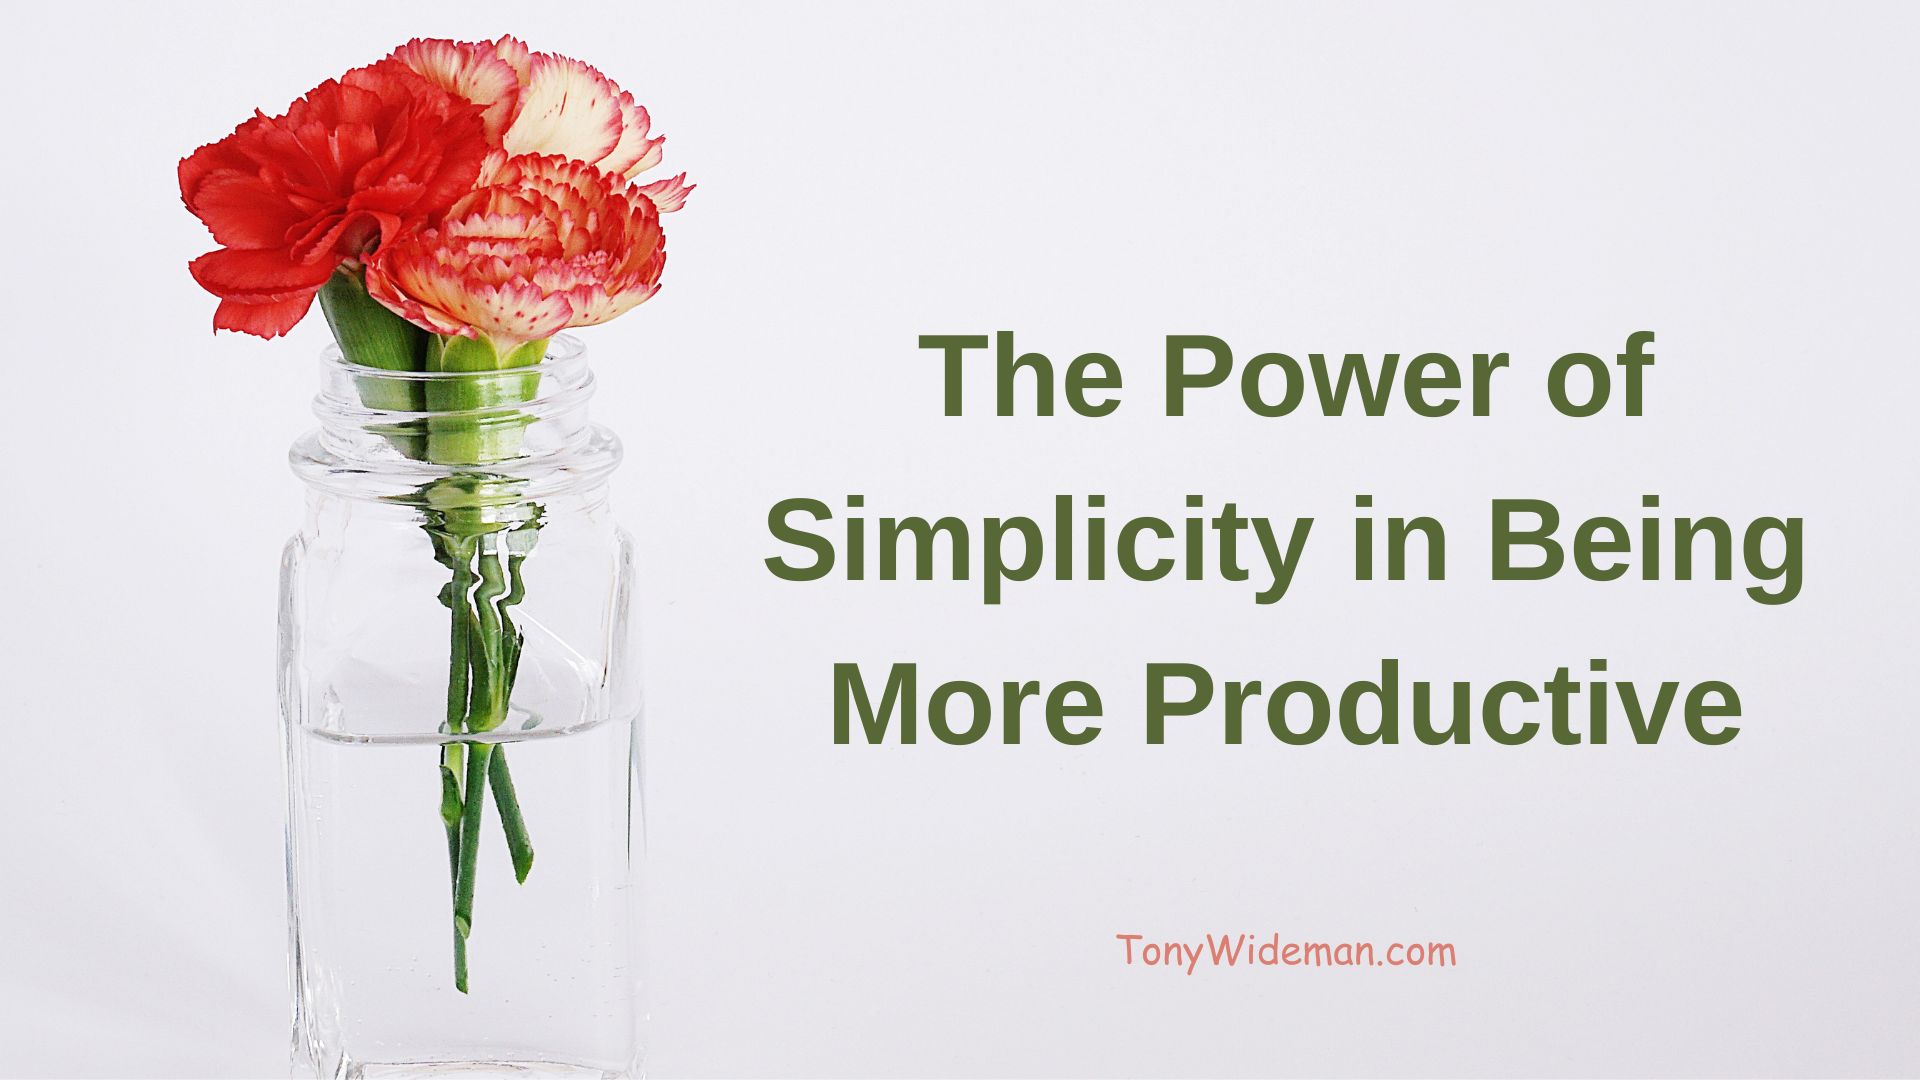 The Power of Simplicity in Being More Productive